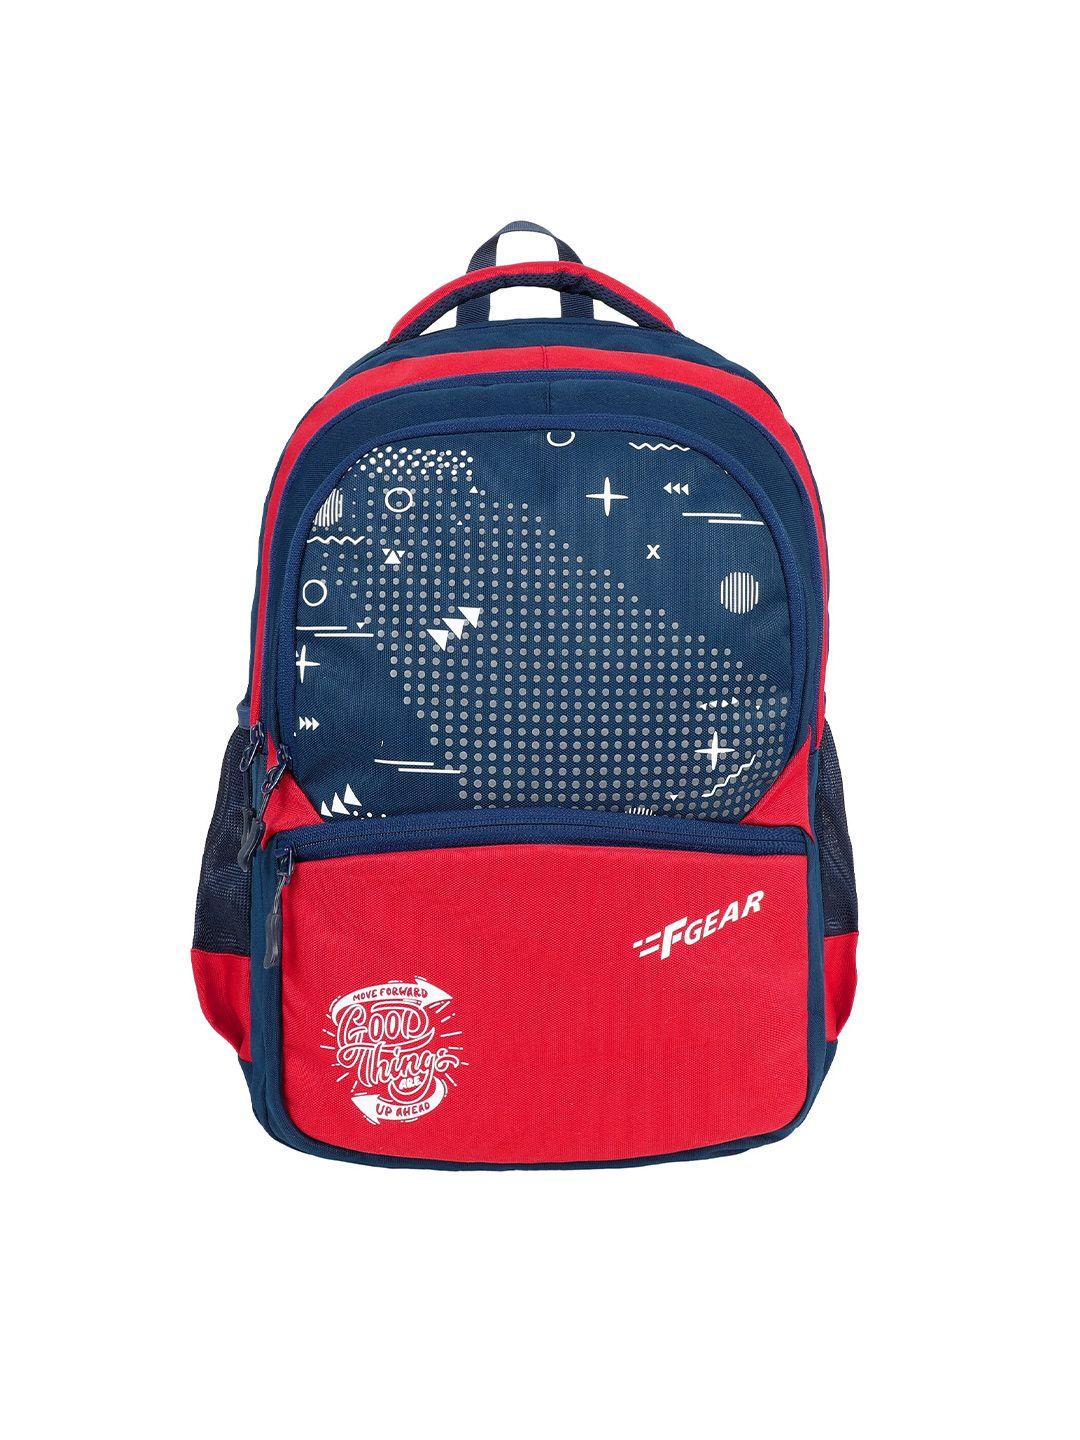 f gear graphic printed backpack with raincover